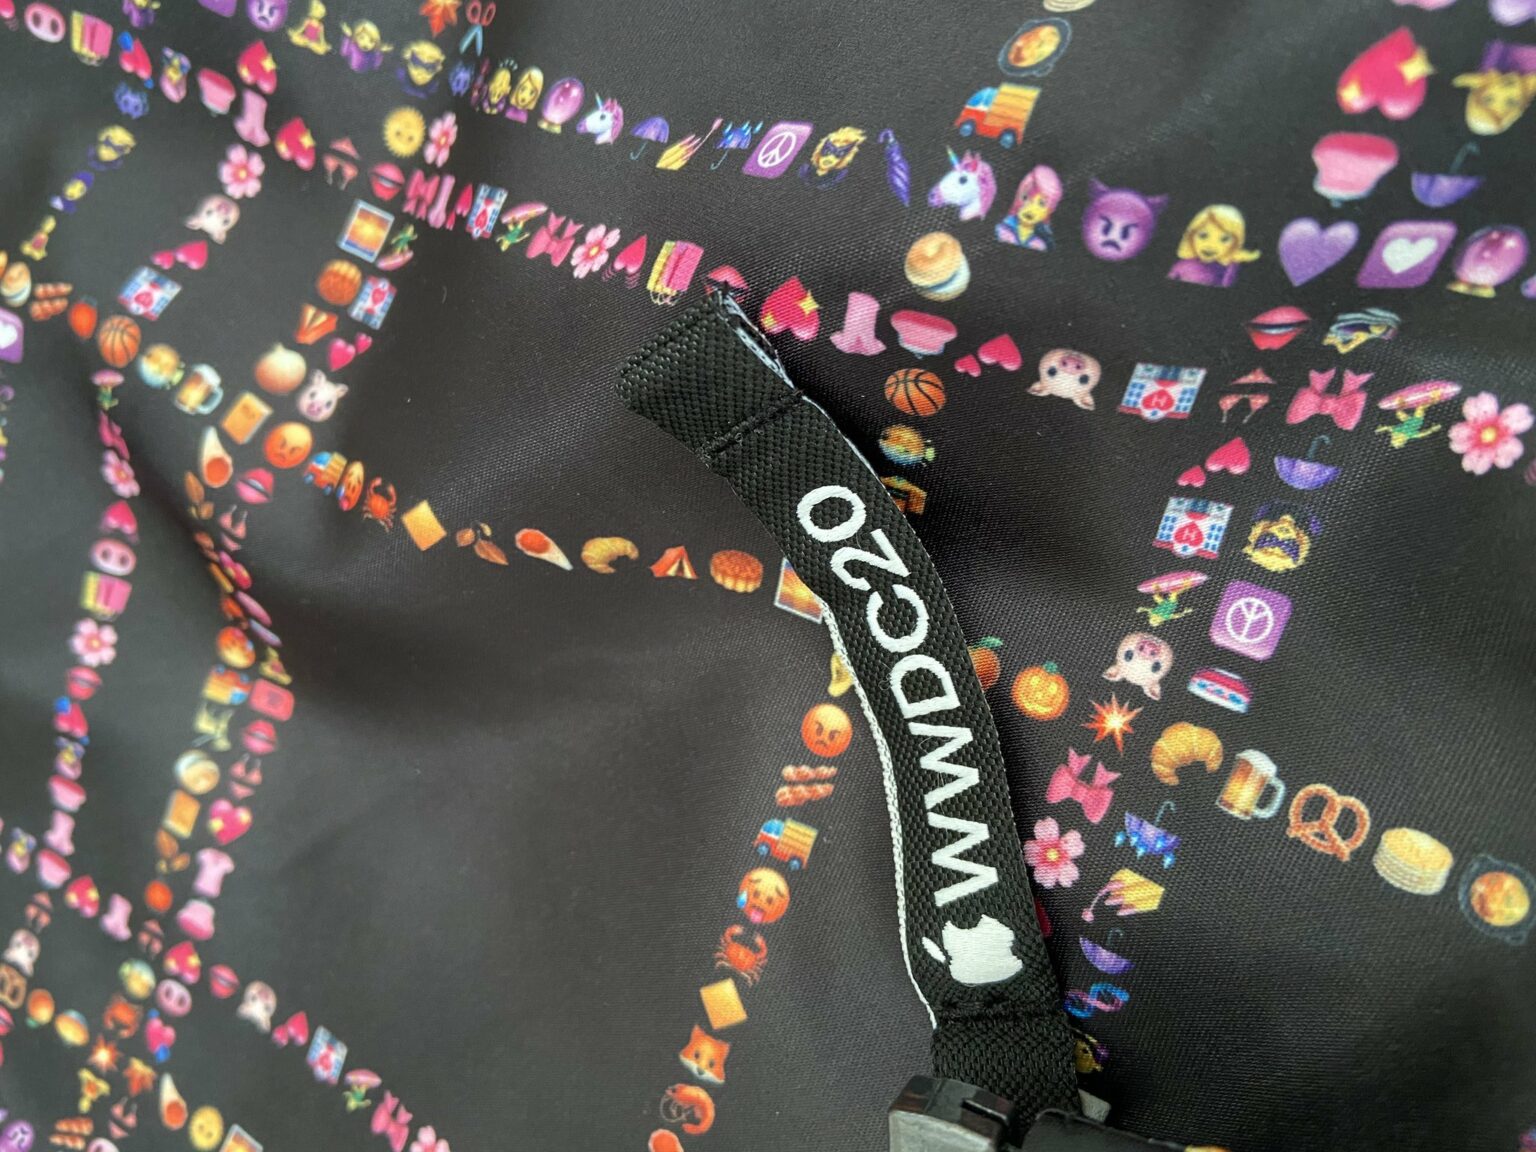 WWDC 2020 jacket design is covered with emojis. From a distance, it looks like a plaid pattern.